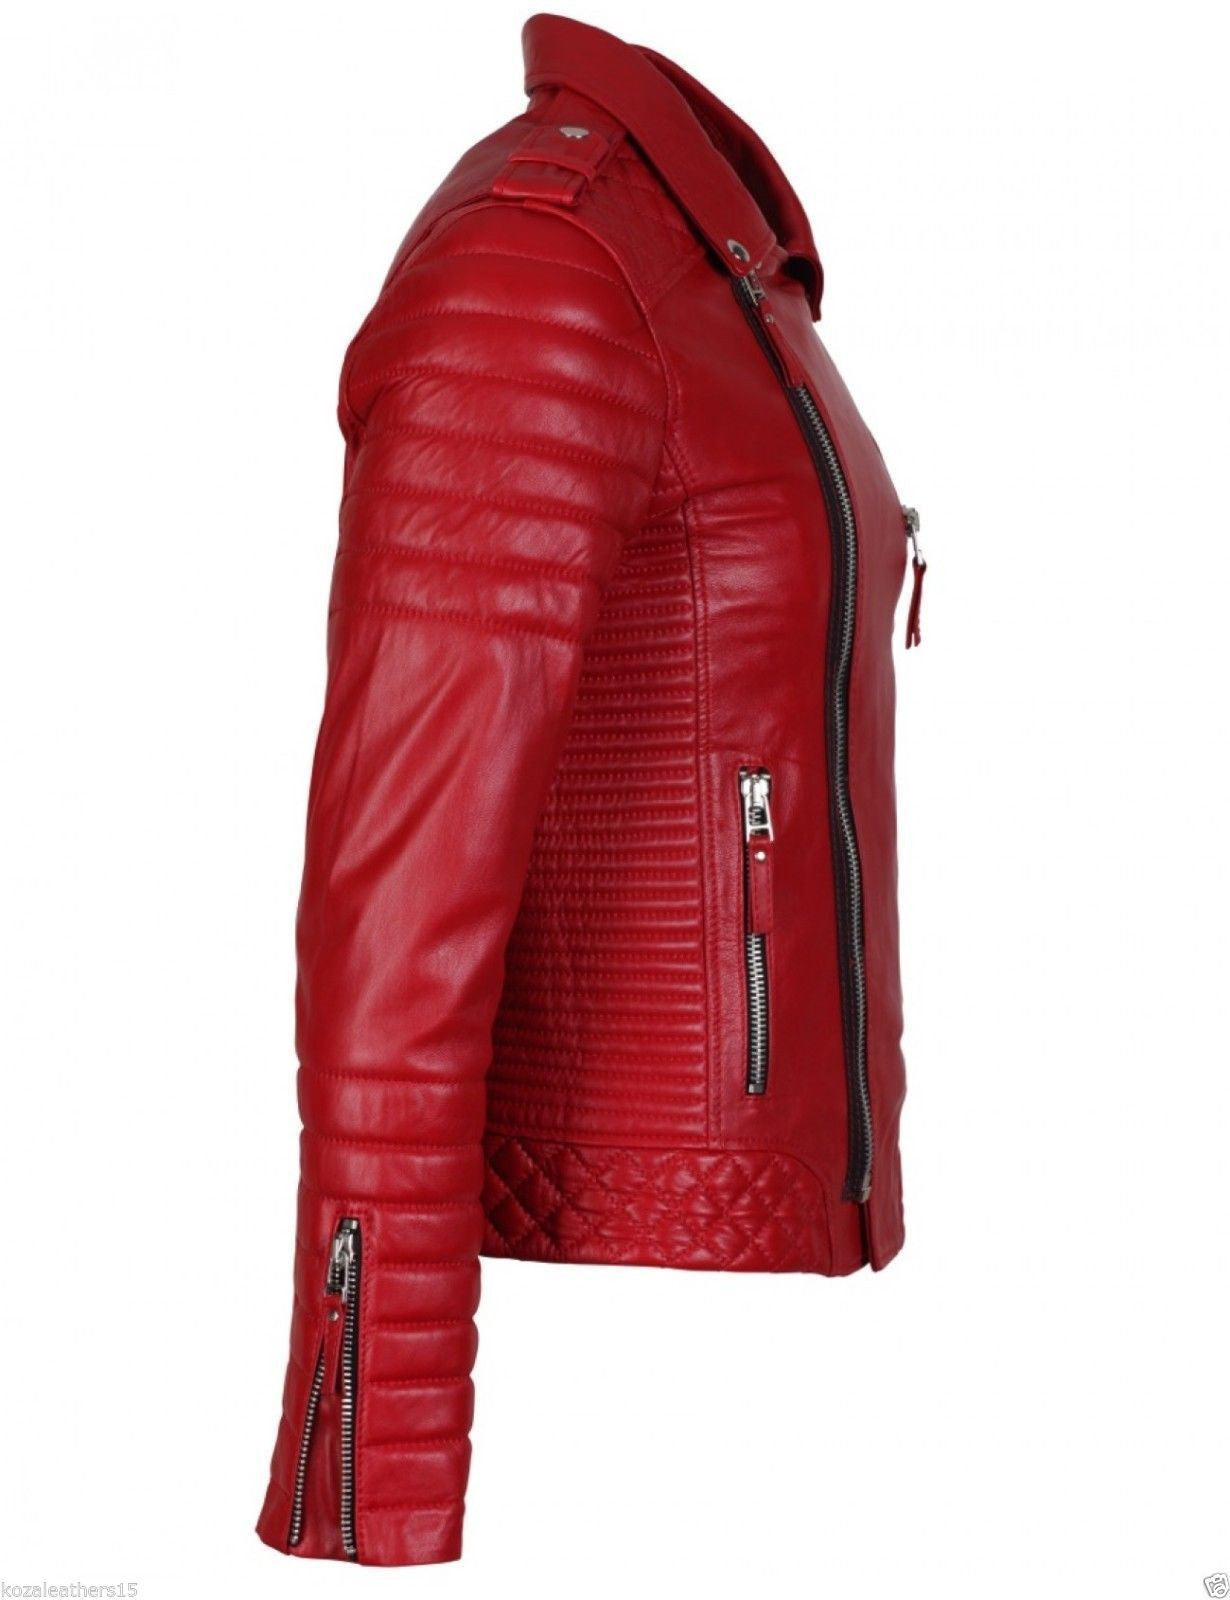 Men Red Genuine Leather Jacket with Black Diamond Quilted